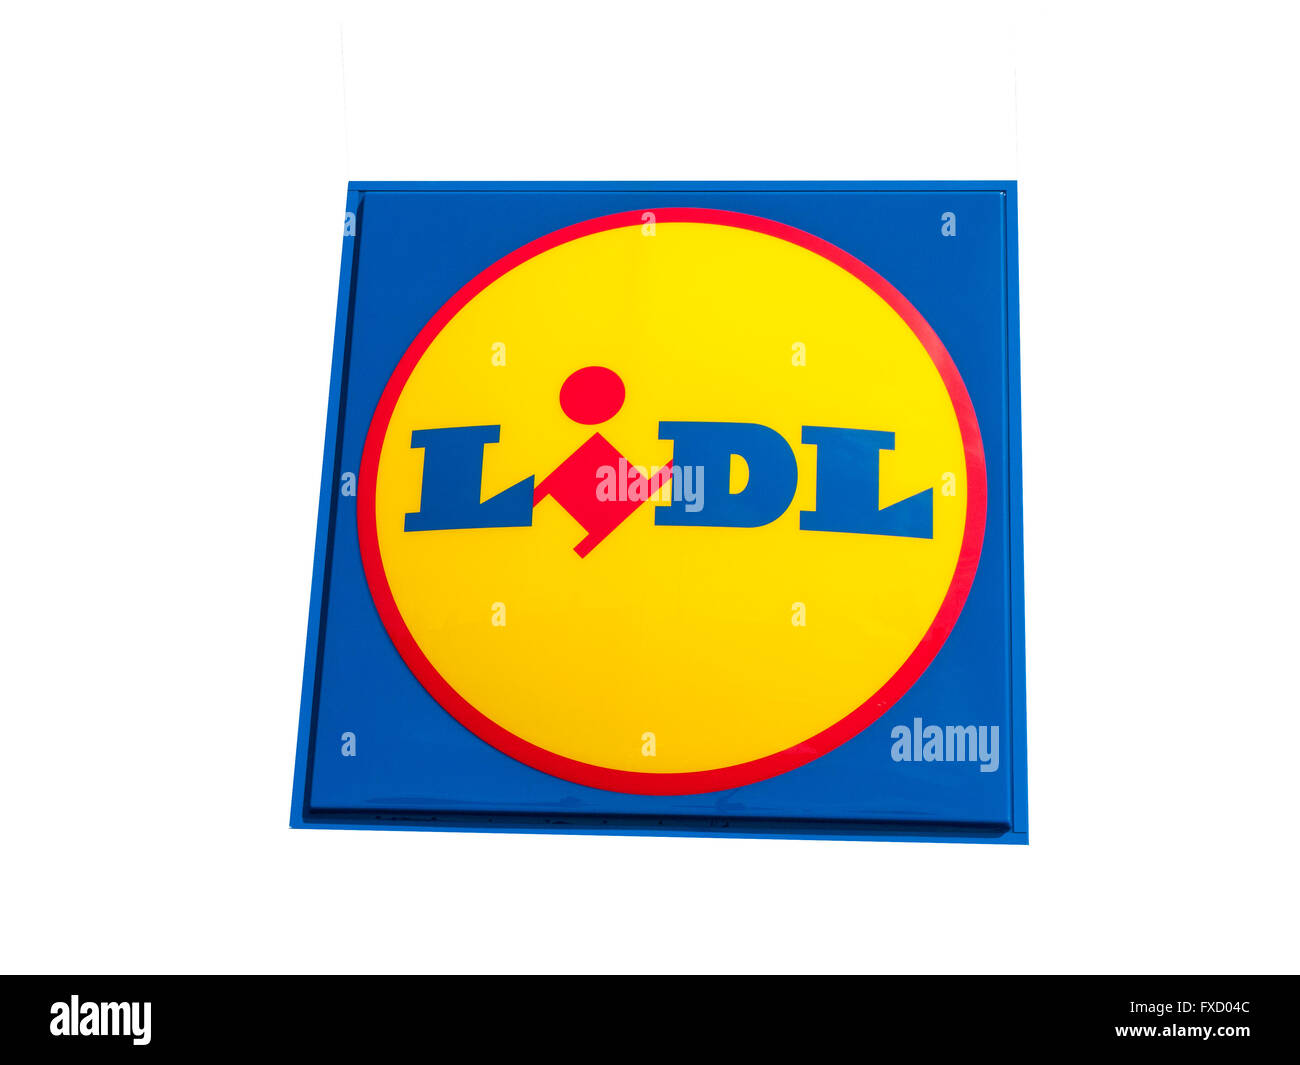 Cut out of Lidl shop sign isolated on white background Stock Photo